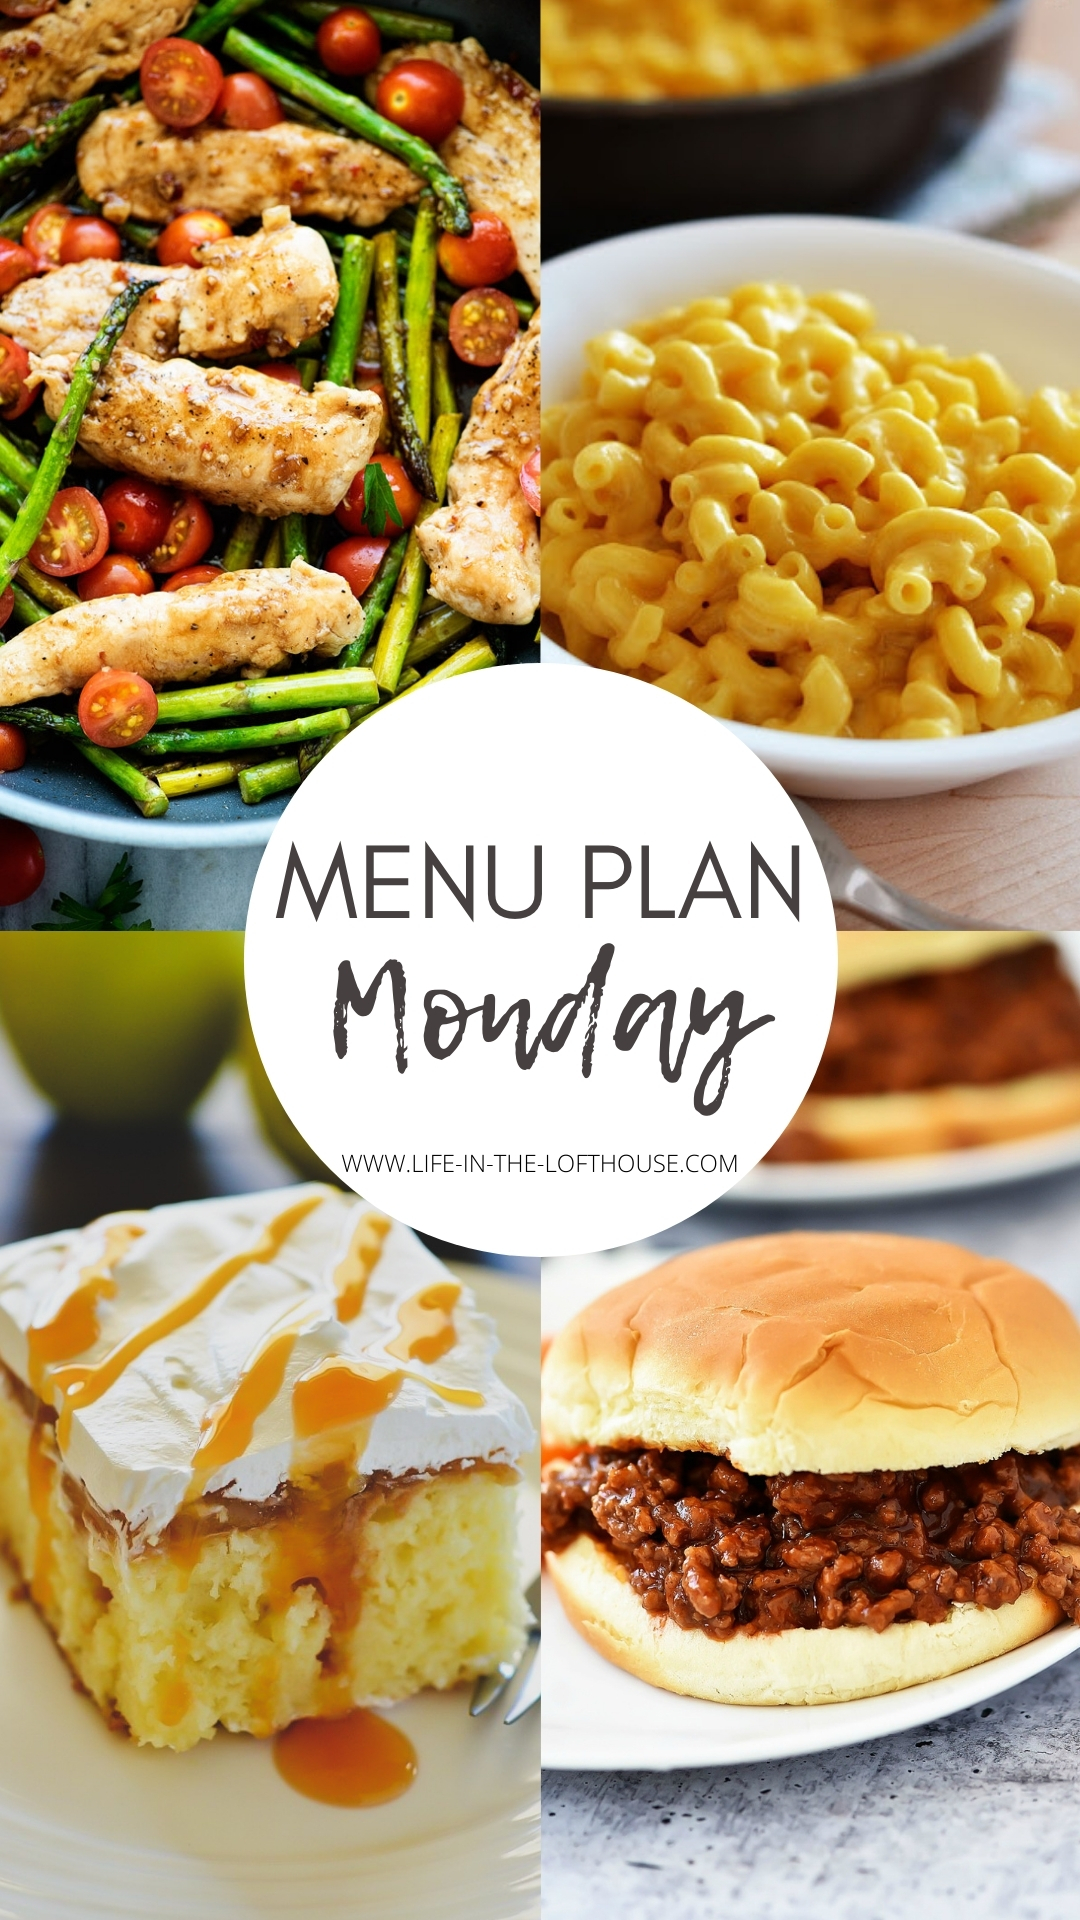 Menu Plan Monday is an easy dinner menu filled with six dinner recipes and one dessert. Life-in-the-Lofthouse.com